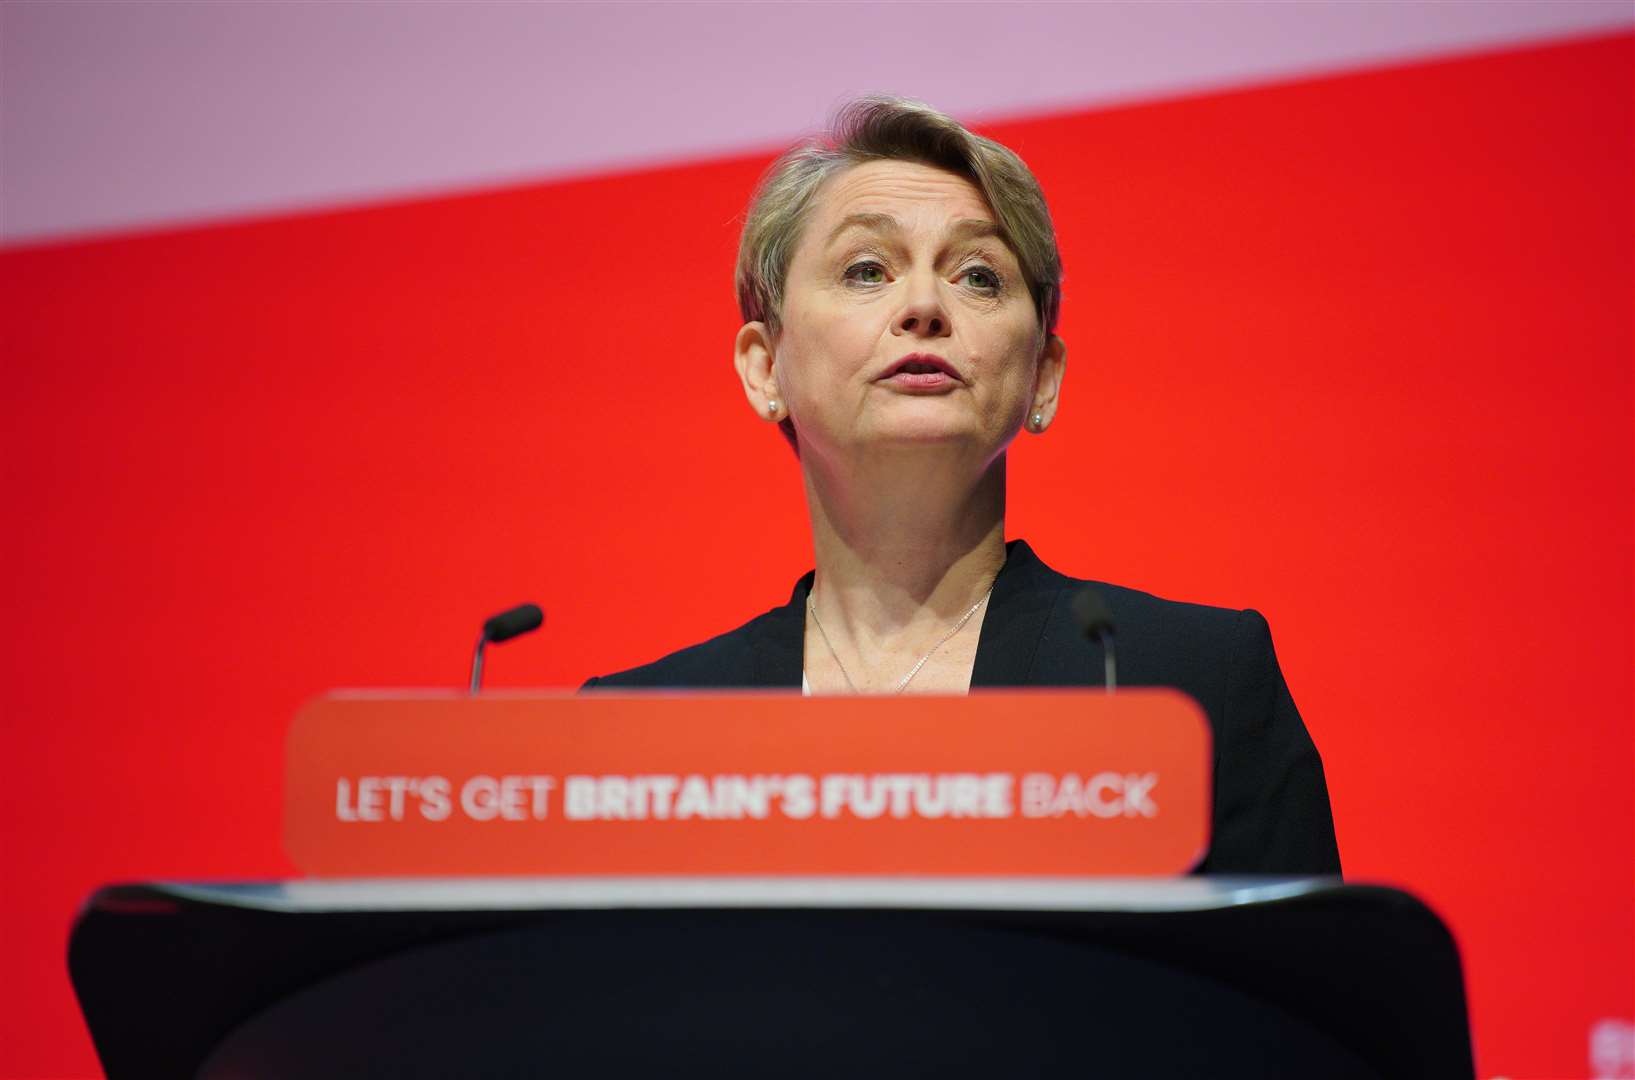 Shadow home secretary Yvette Cooper said the Government’s refusal to ‘come clean’ on the costs of the Rwanda scheme is ‘totally unacceptable’ (Peter Byrne/ PA)